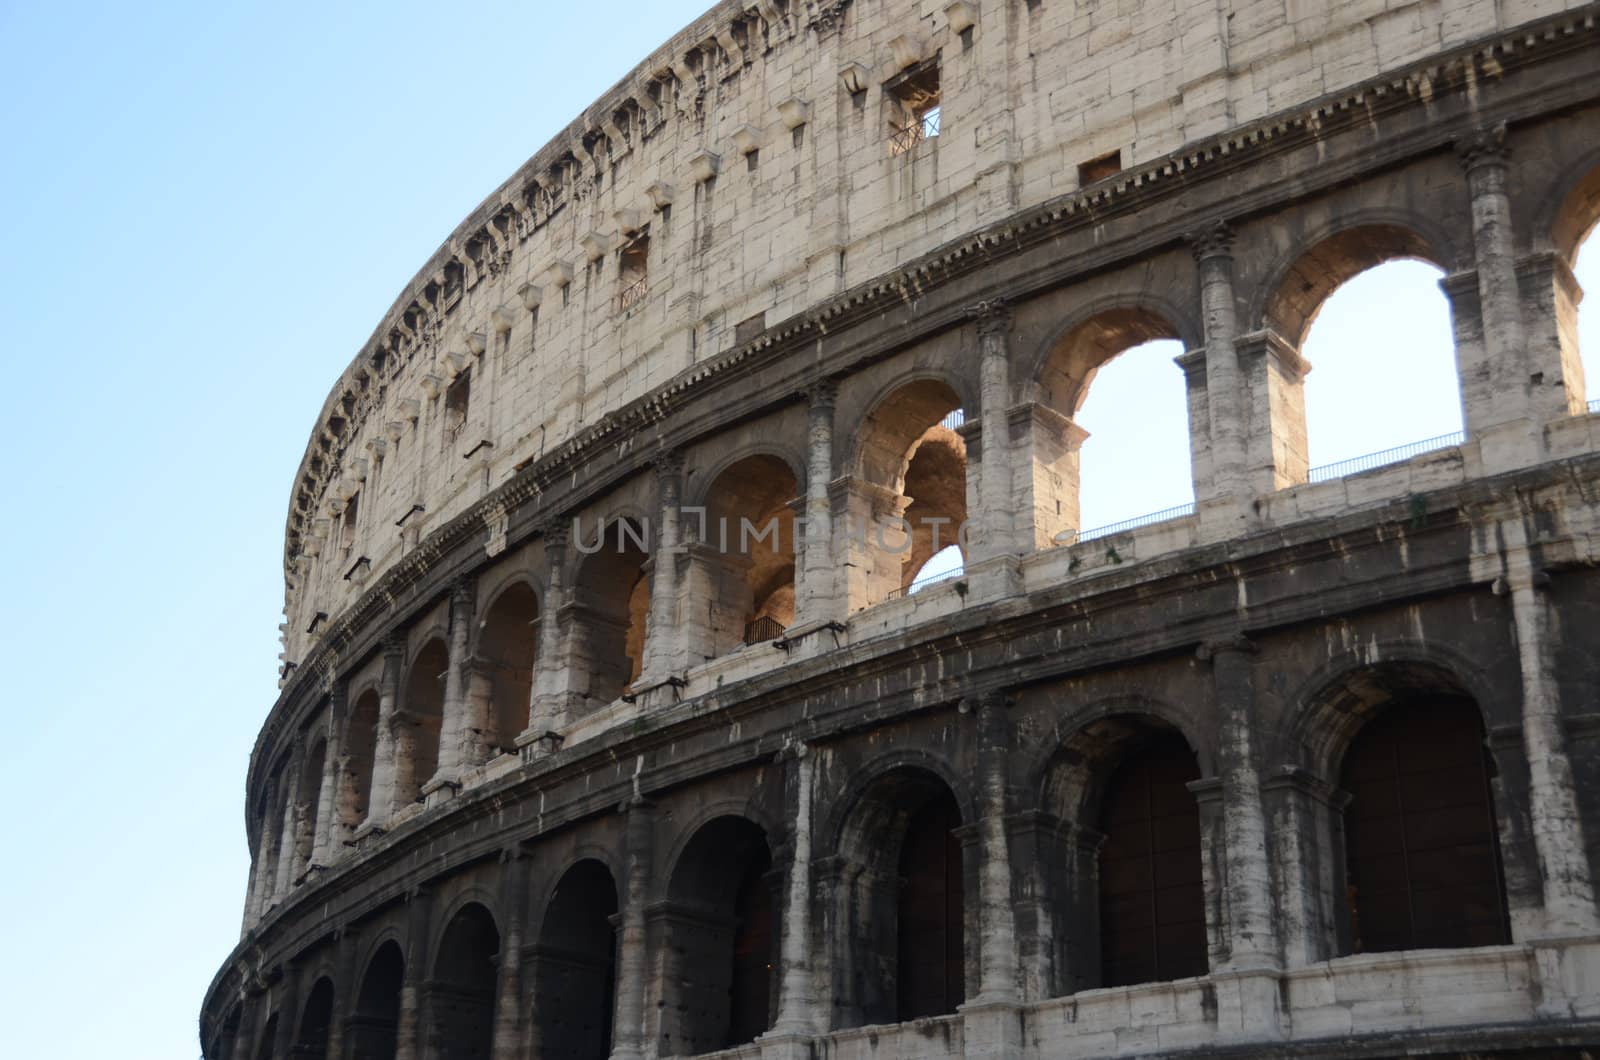 colosseum details by seattlephoto